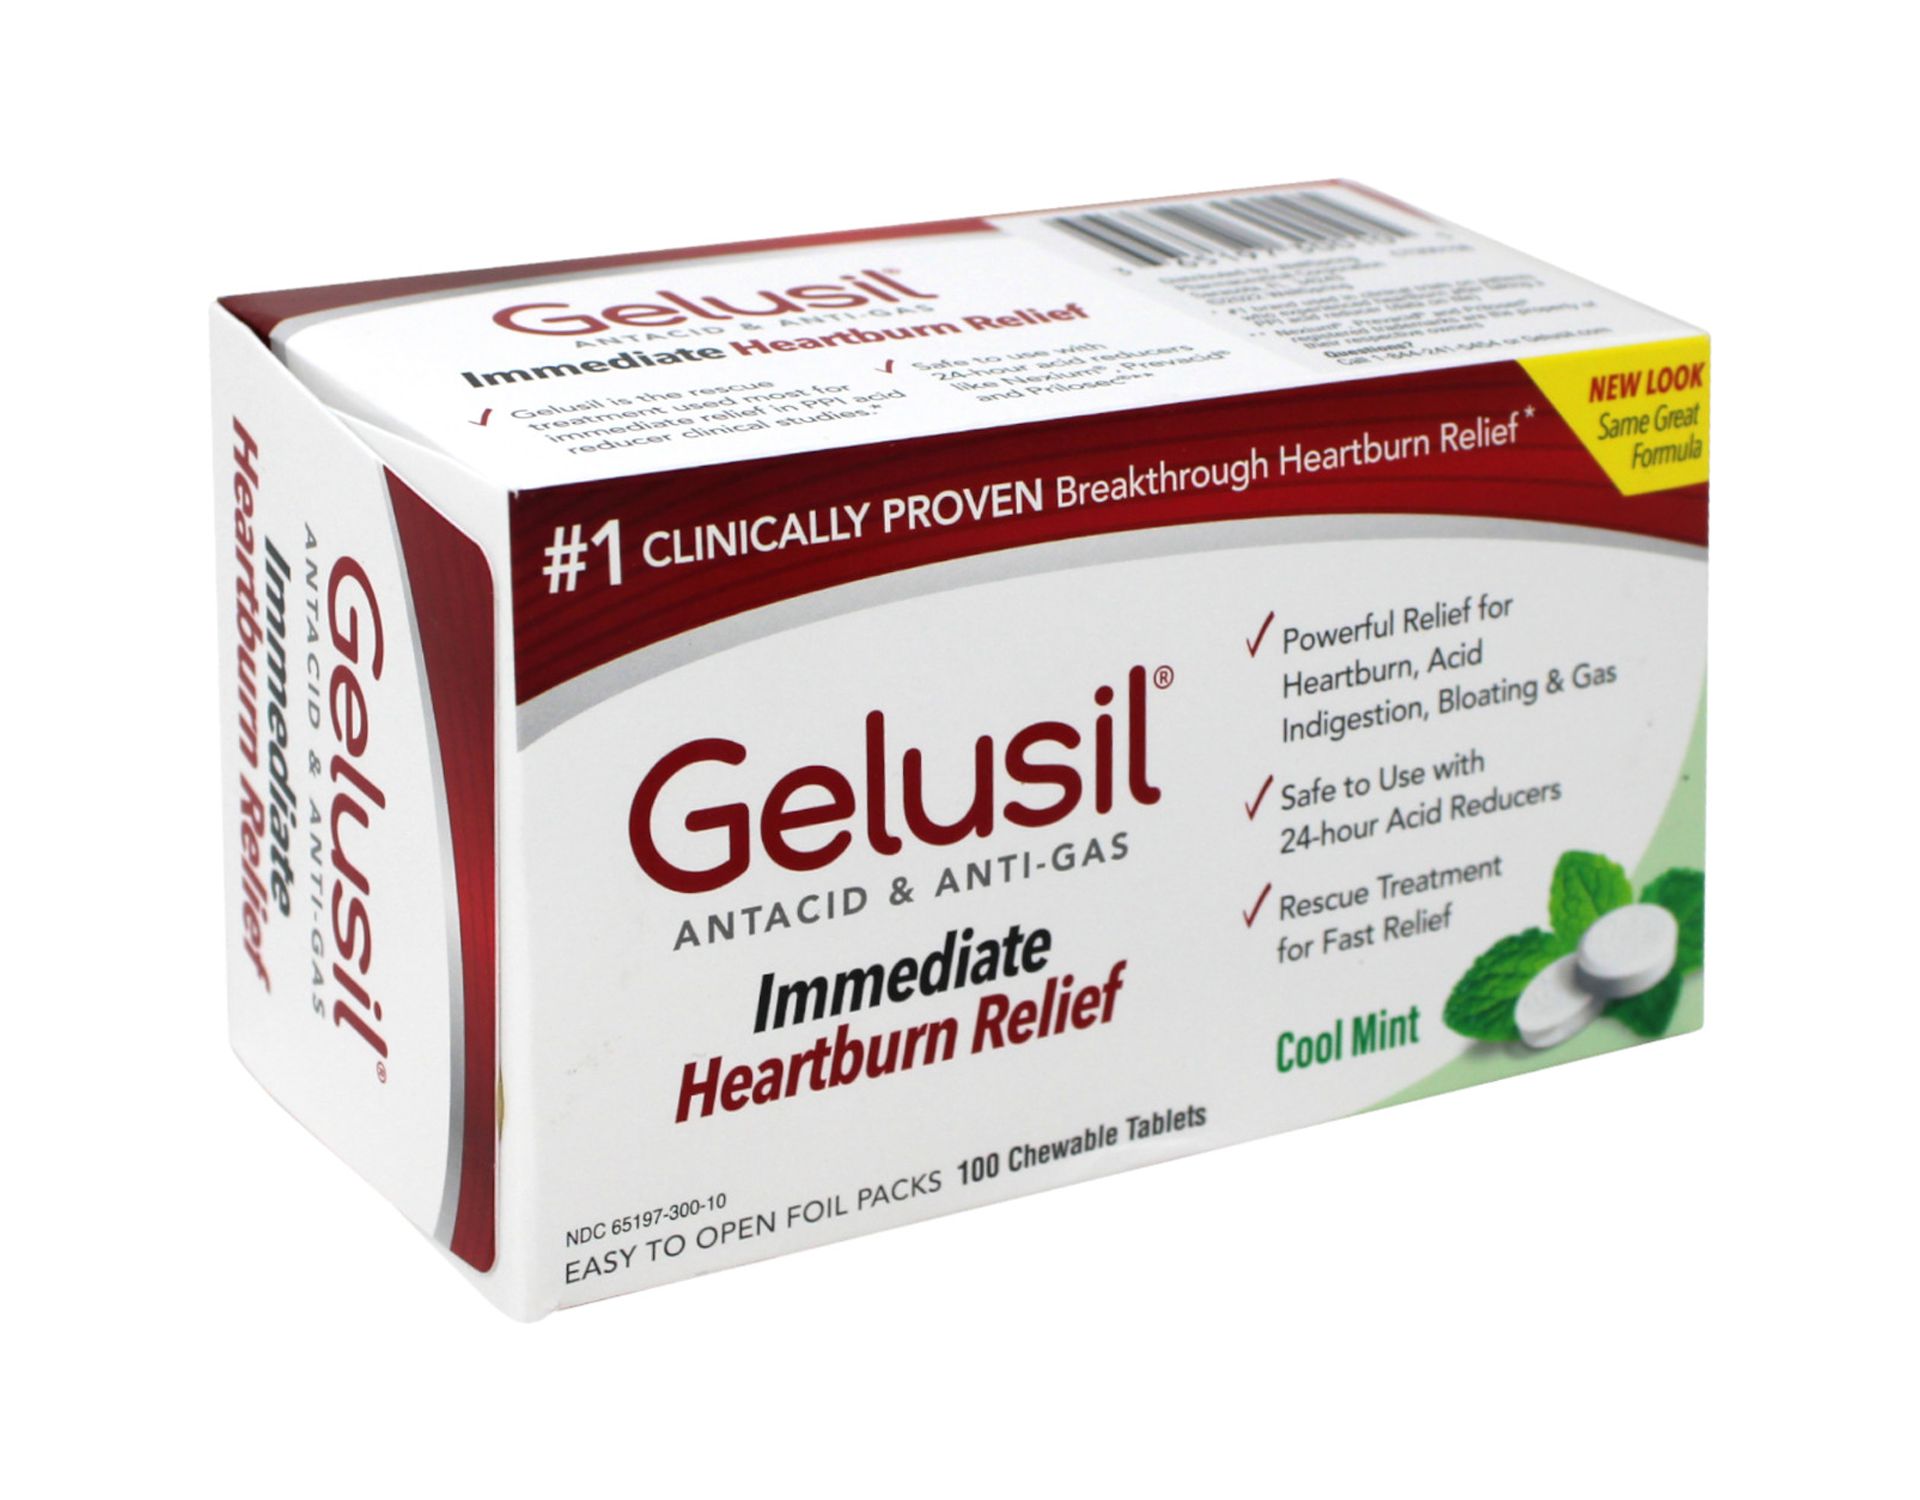 Gelusil Antacid/Anti-Gas Tablets Cool Mint, 100 Tablets (Pack of 3) - image 3 of 5